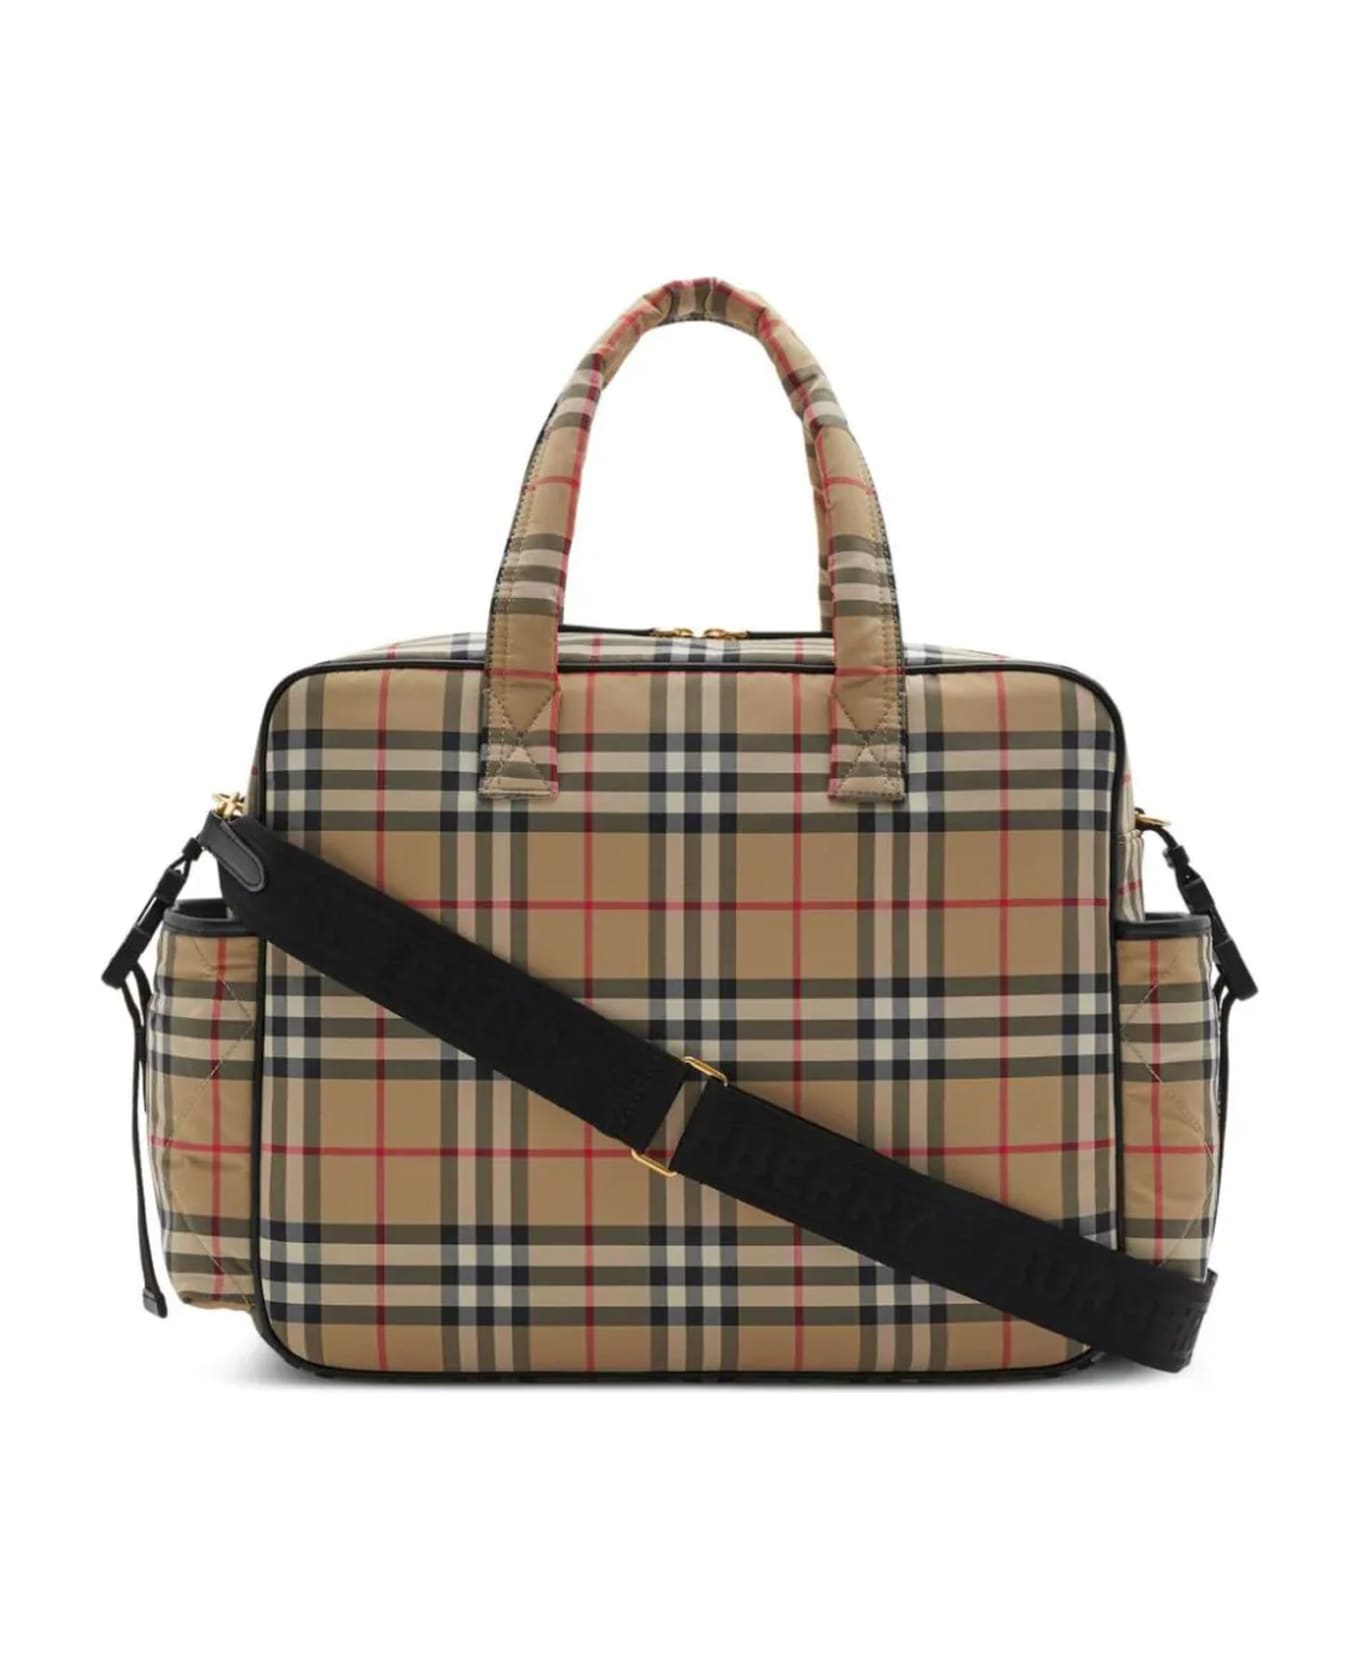 Burberry Check Polyamide Changing Bag - Archive beige chk